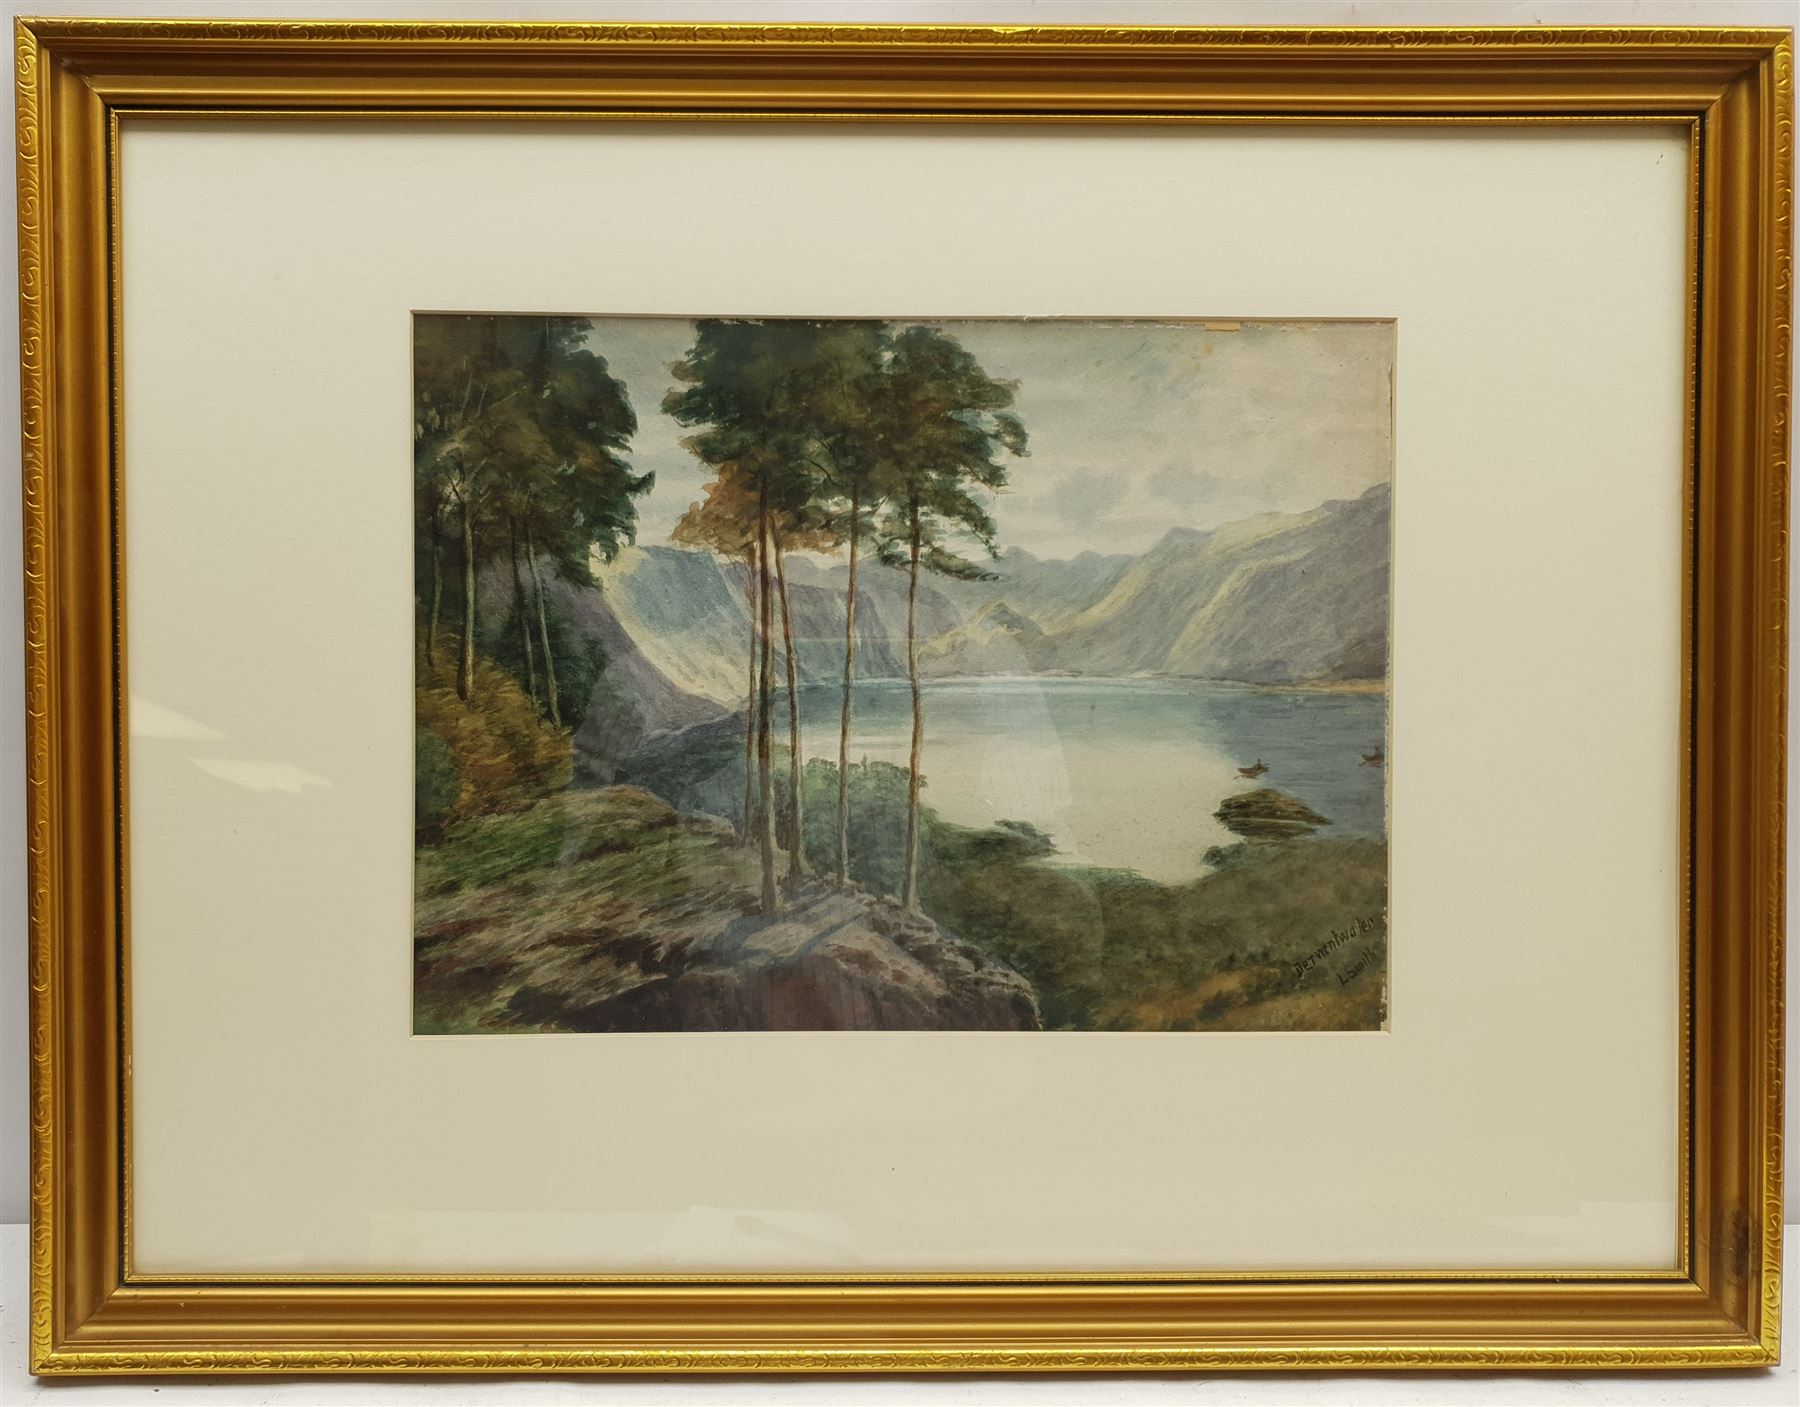 English School (19th century): Cottage by the Lake - Image 3 of 3